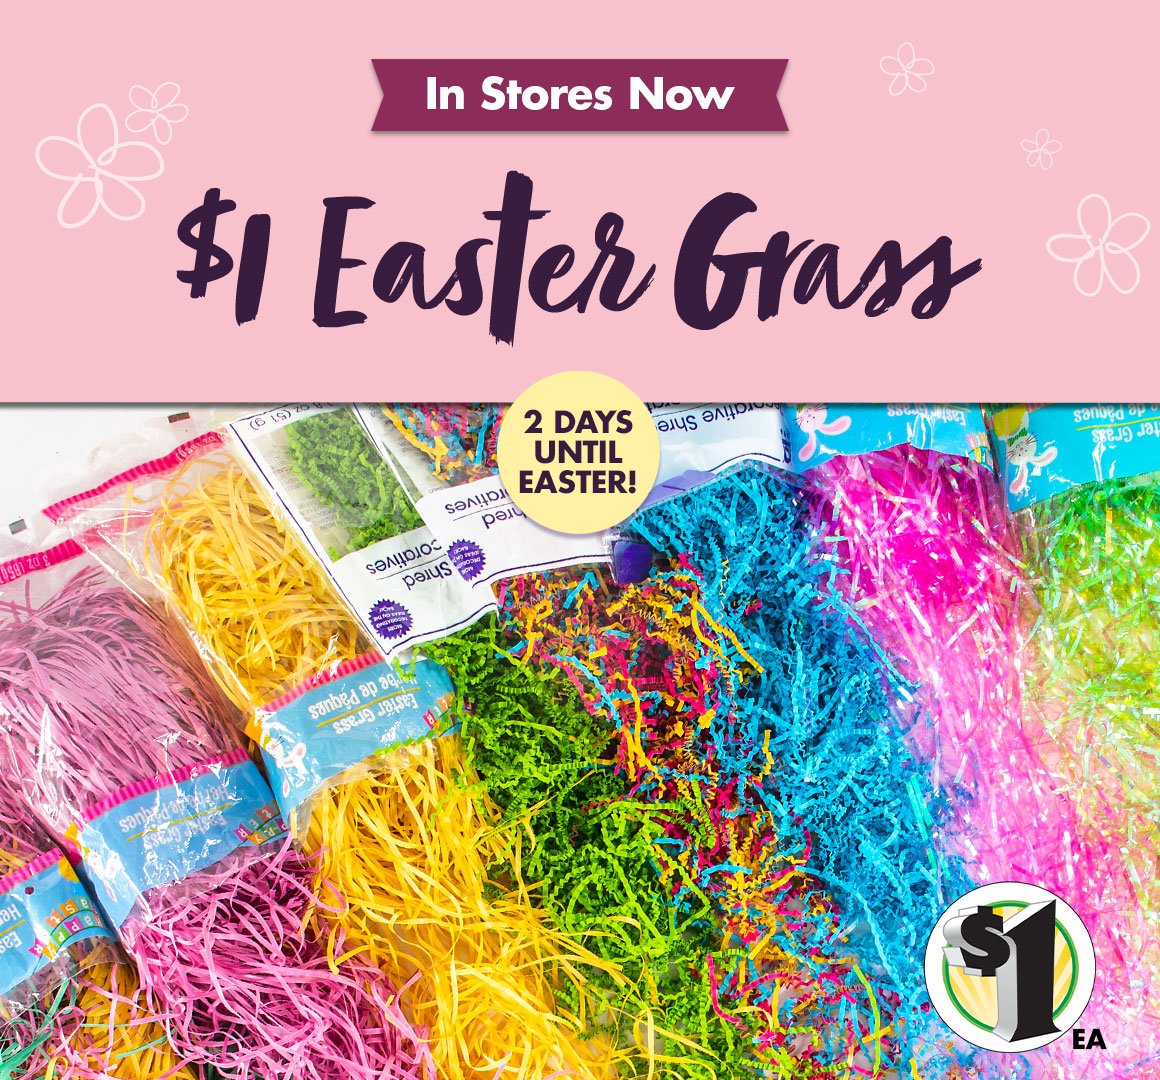 Dollar Tree Hop In Stores Now We Have What You Need for Easter! Milled